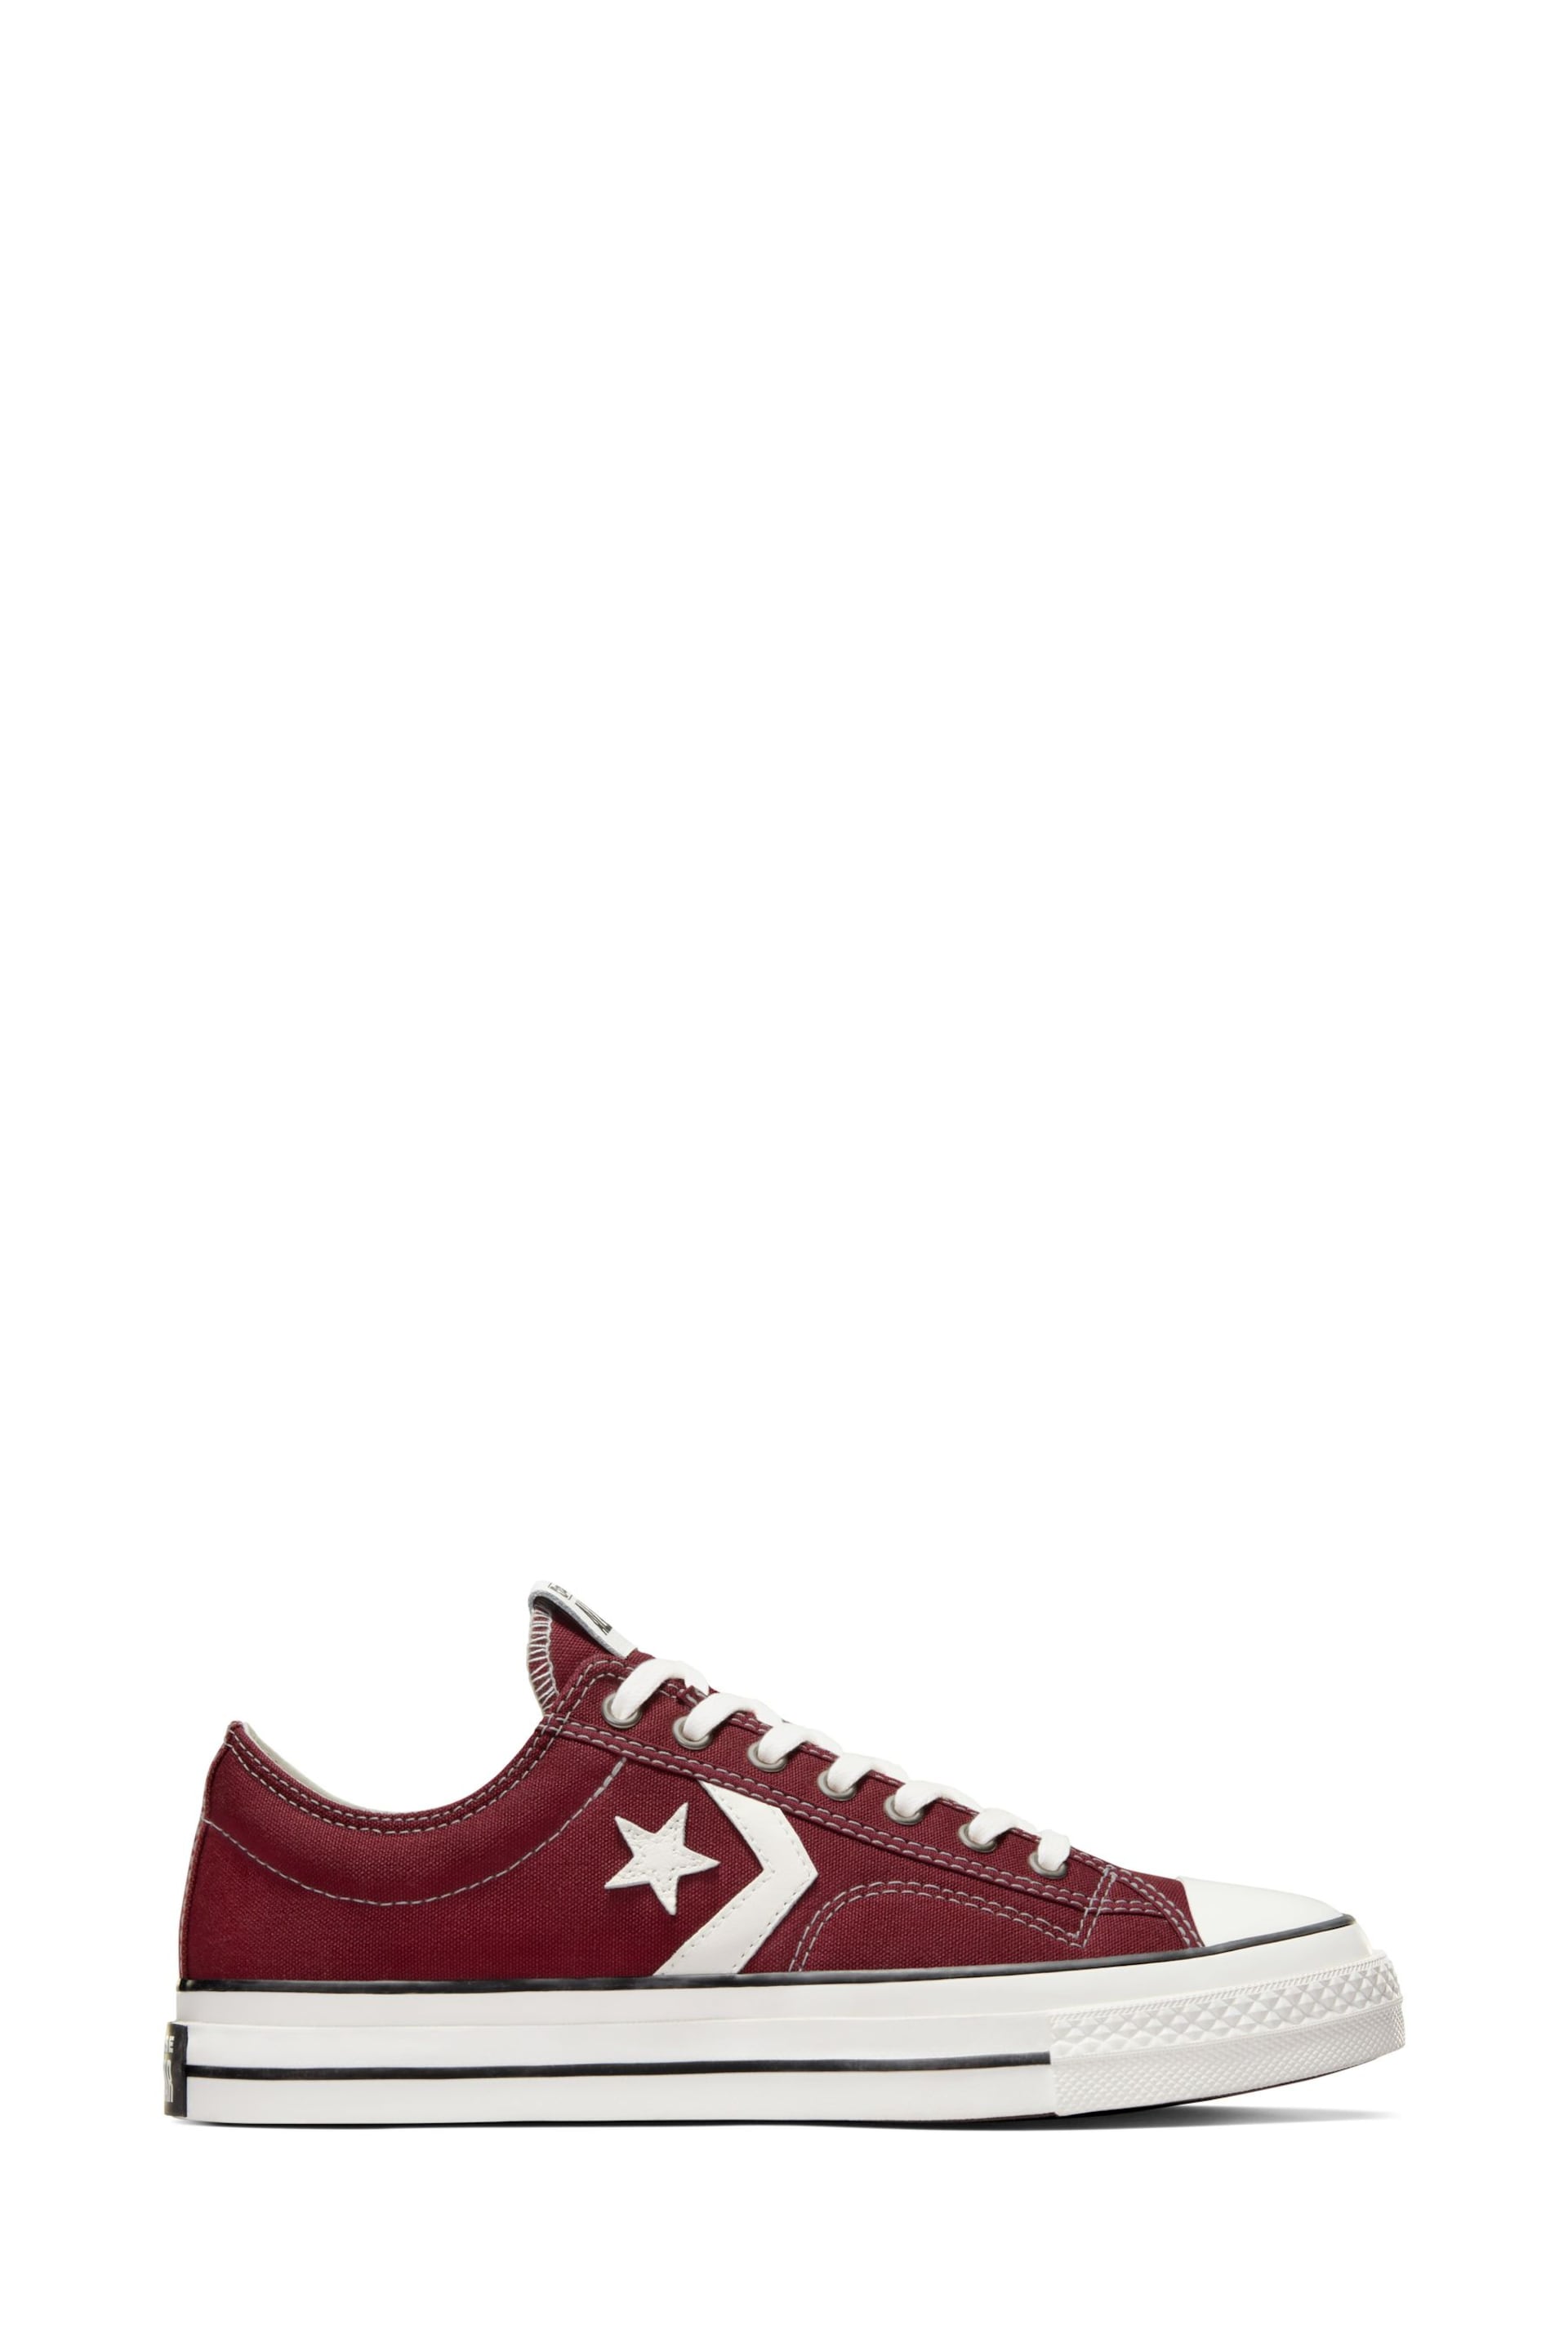 Converse Red Star Player 76 Low Trainers - Image 1 of 7